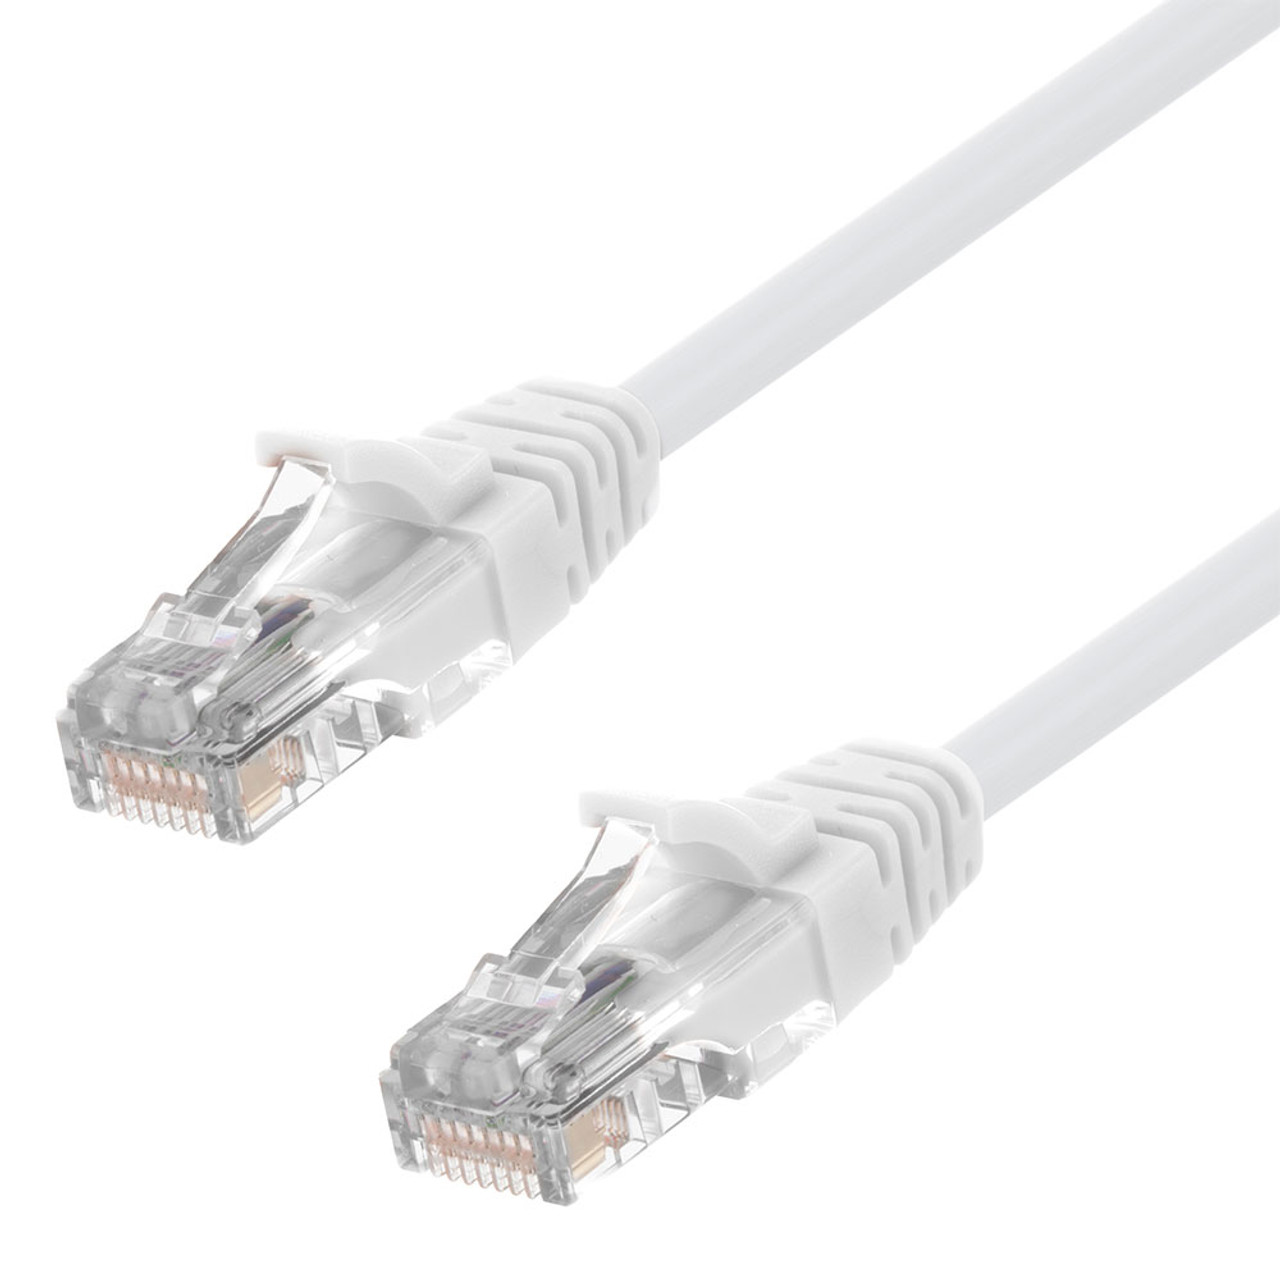 Ethernet Patch Cable CAT5E, UTP, 24AWG, 10 Ft,  10 pack, White